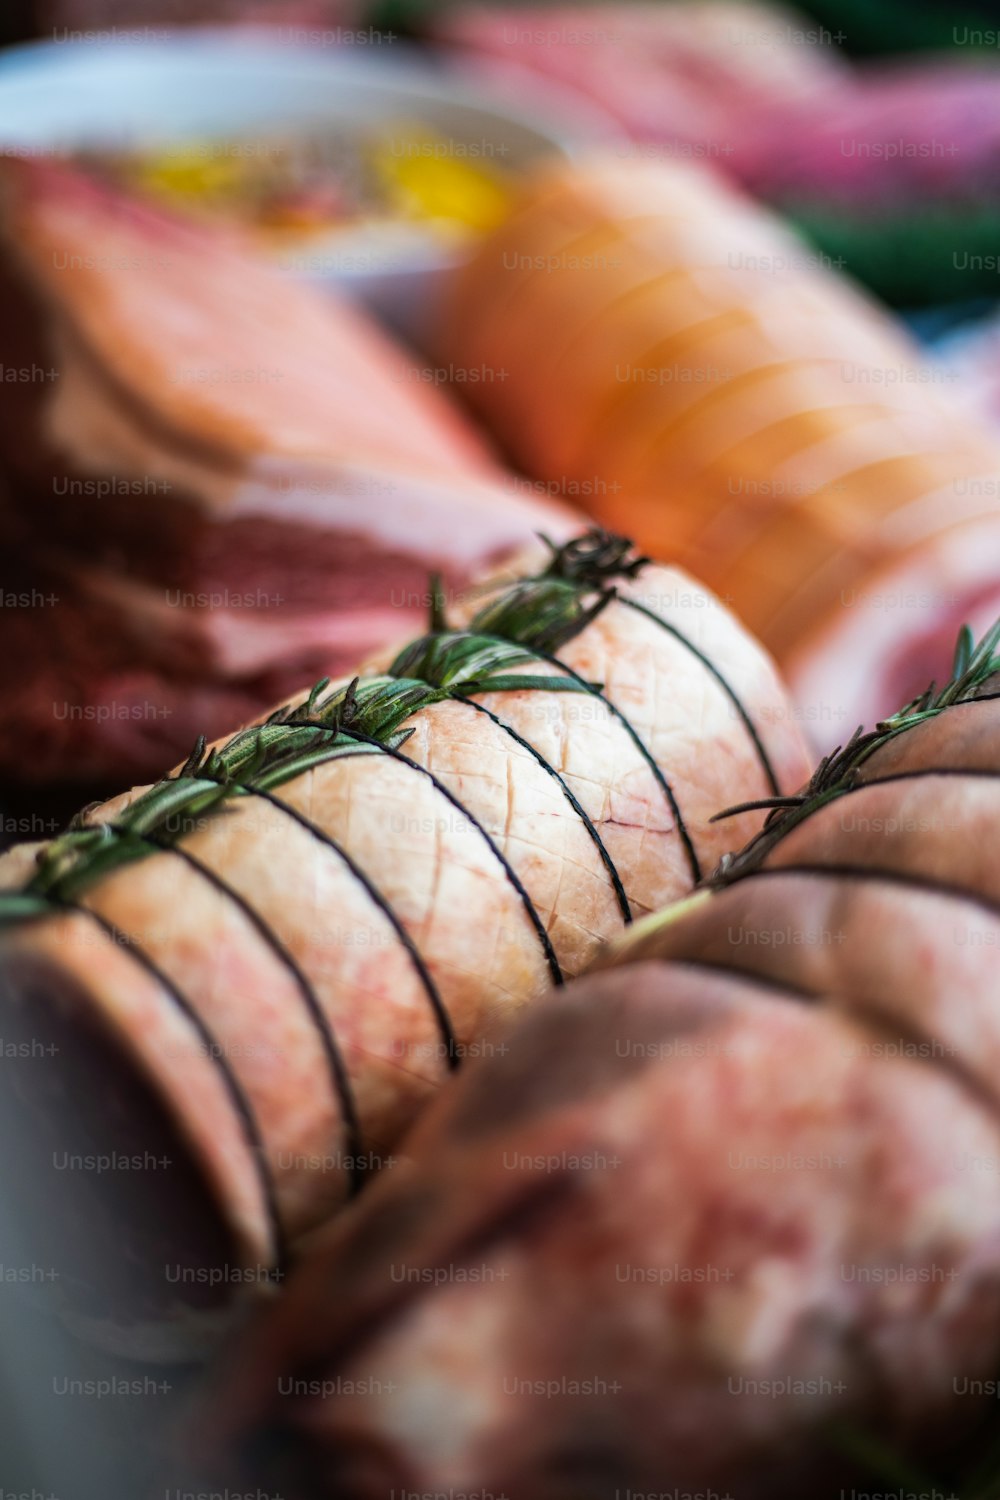 Meat Food Pictures  Download Free Images on Unsplash